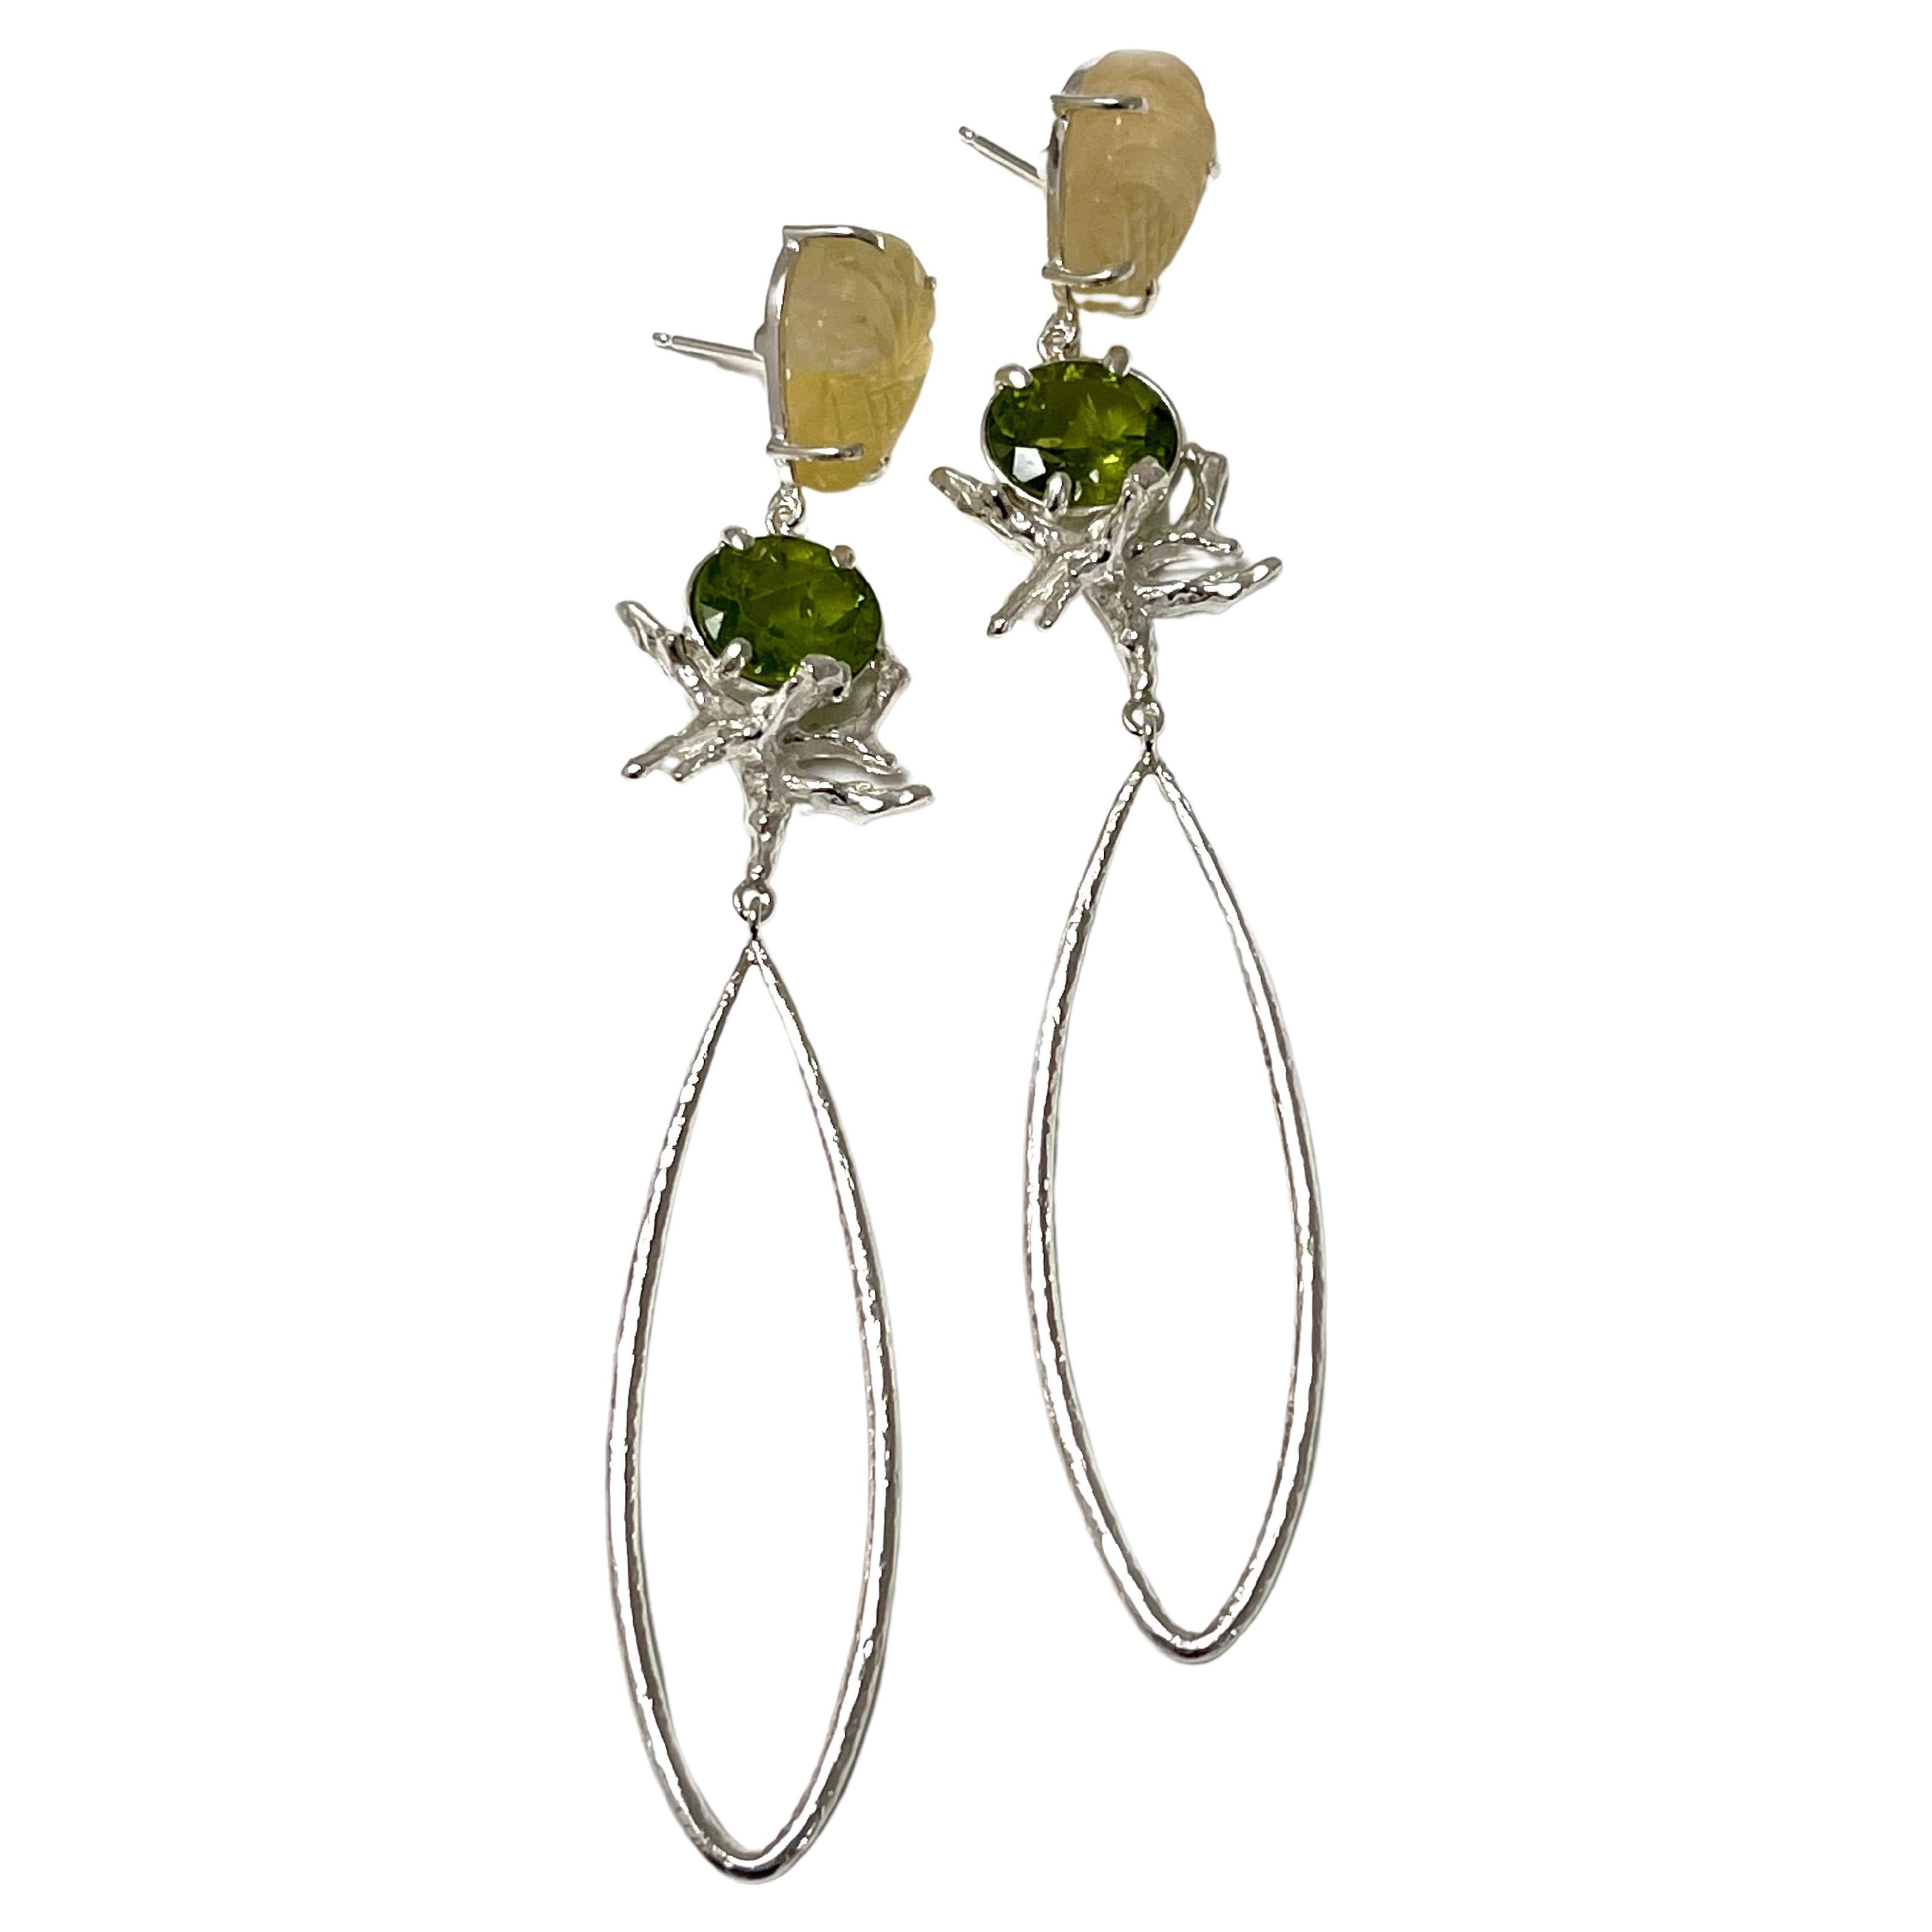 Lagoon Teardrop Earrings in Peridot, Fluorite, Sterling Silver with Coral Accent For Sale